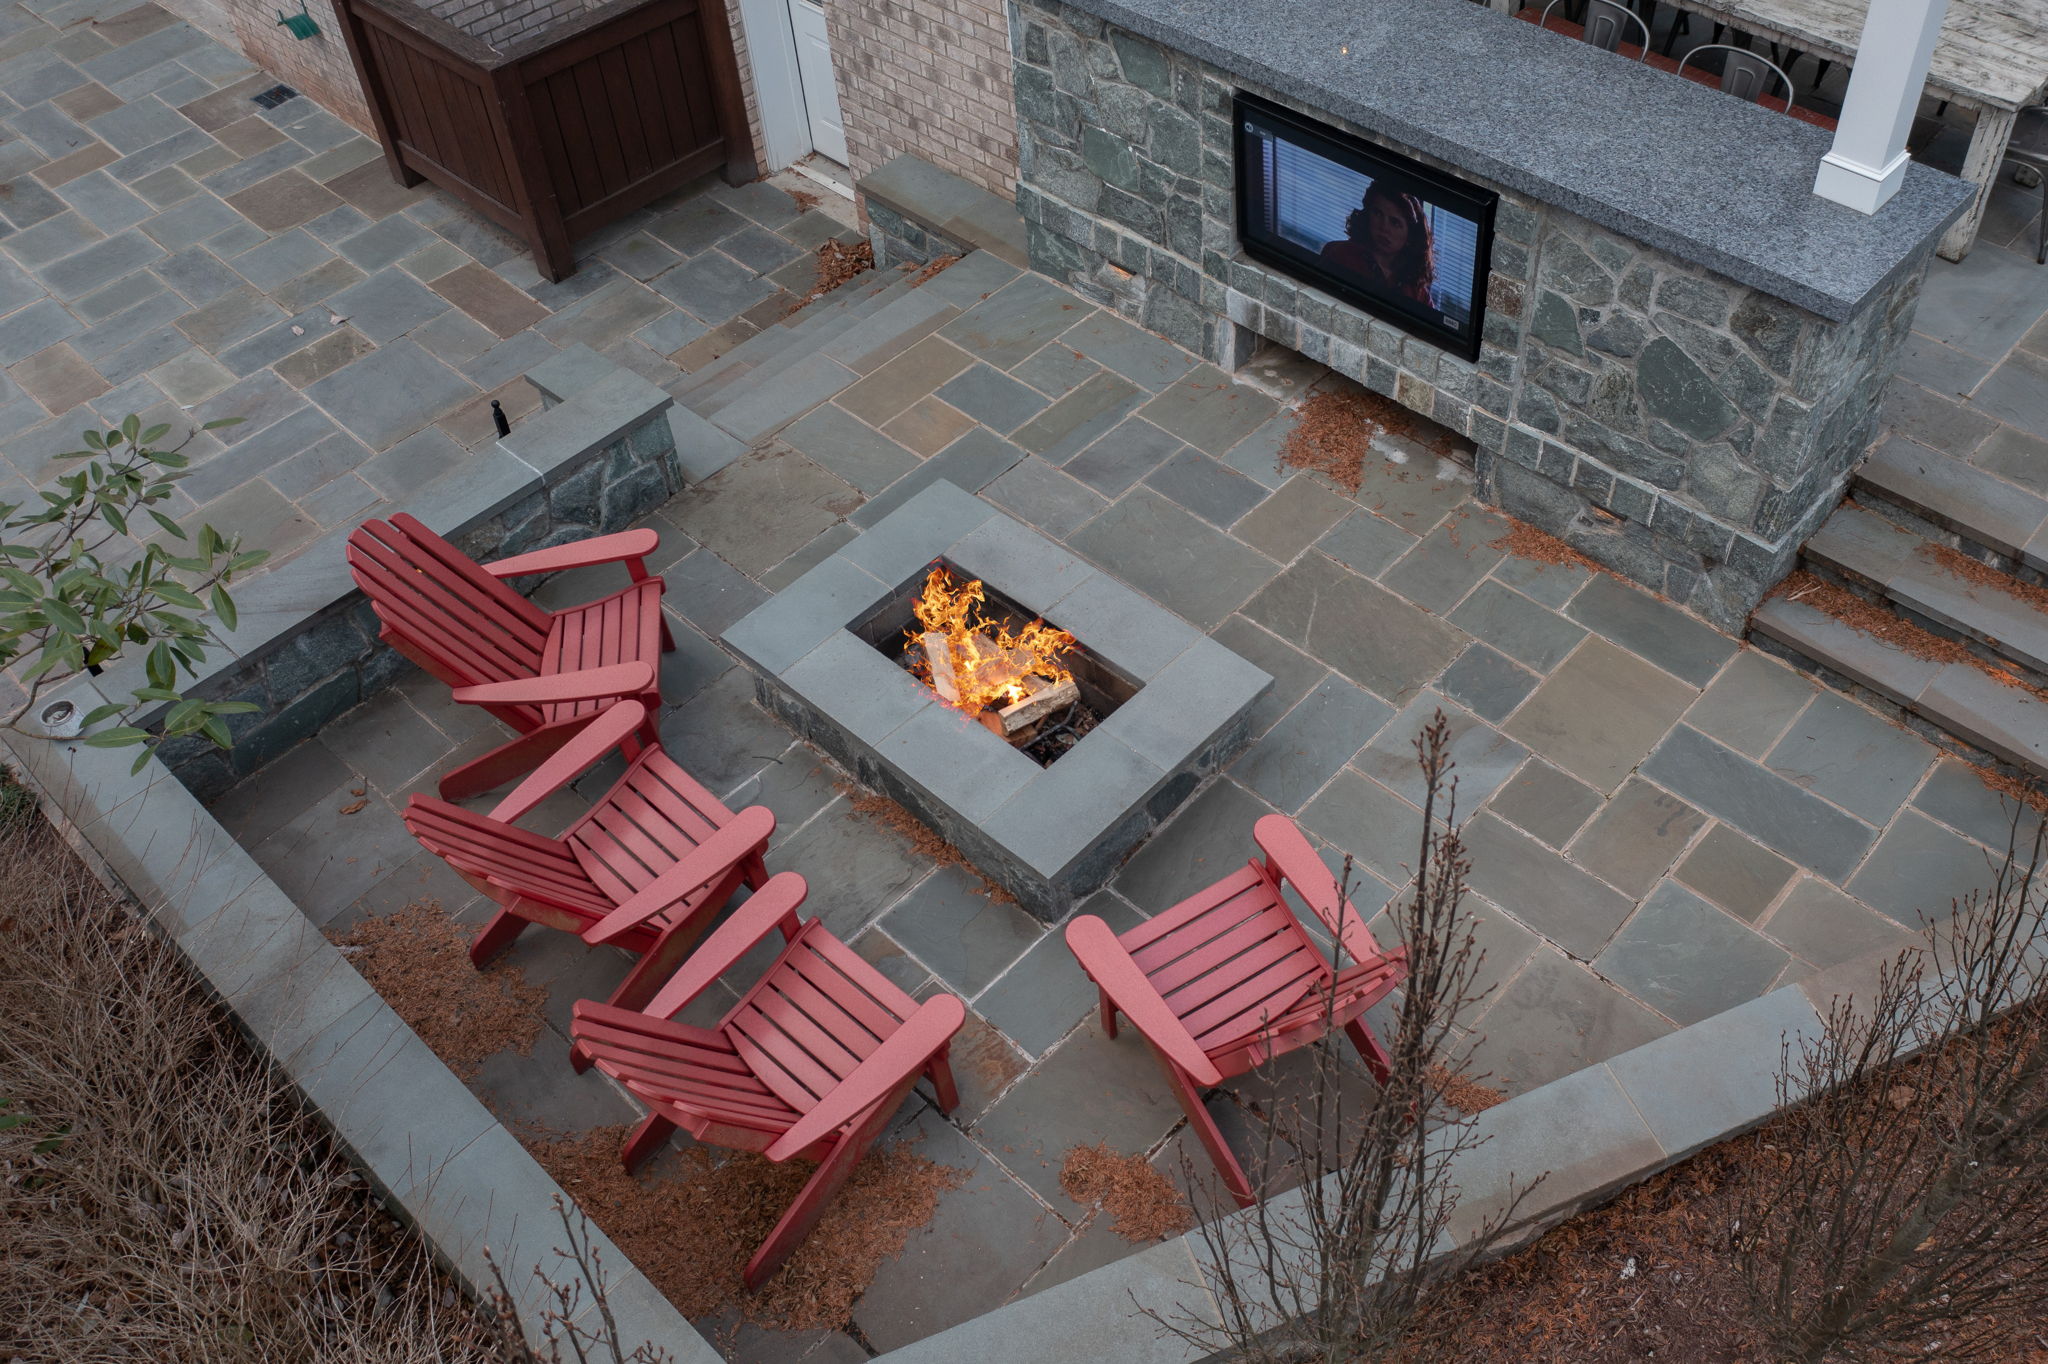 Overview of the firepit terrace